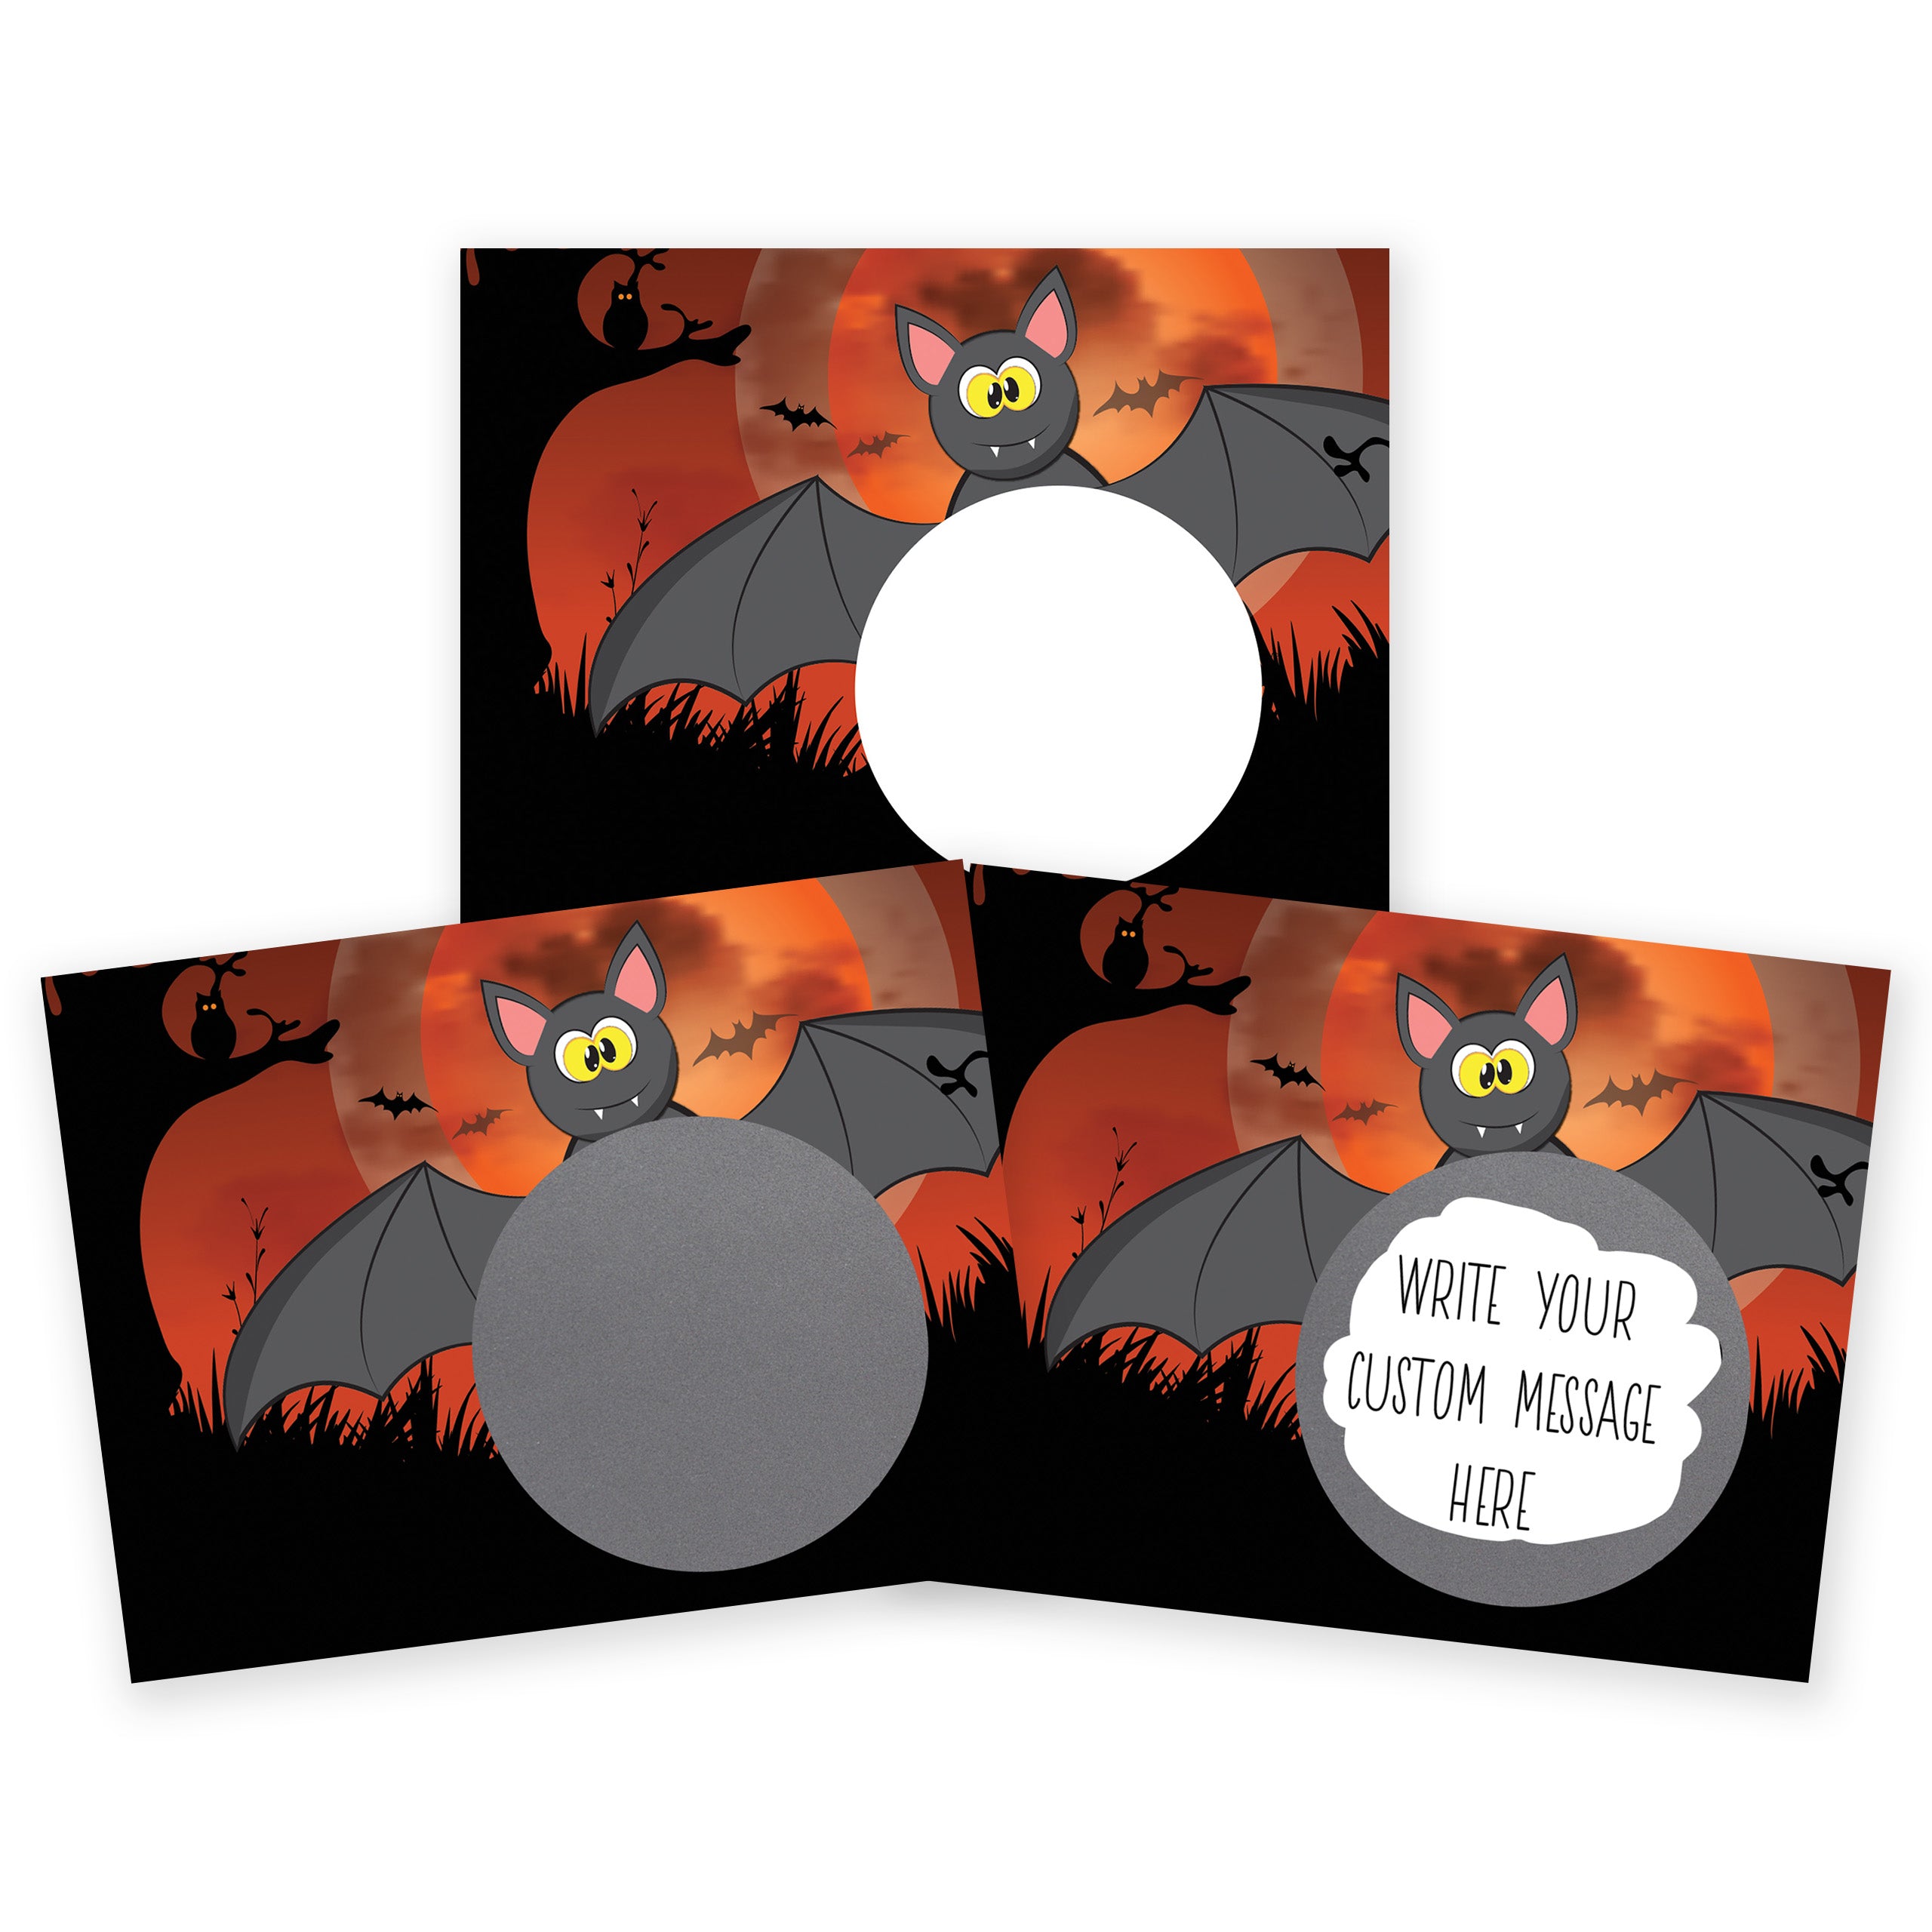 DIY Halloween Bat Make Your Own Scratch Offs - 20 Cards and 20 Scratch Off Stickers